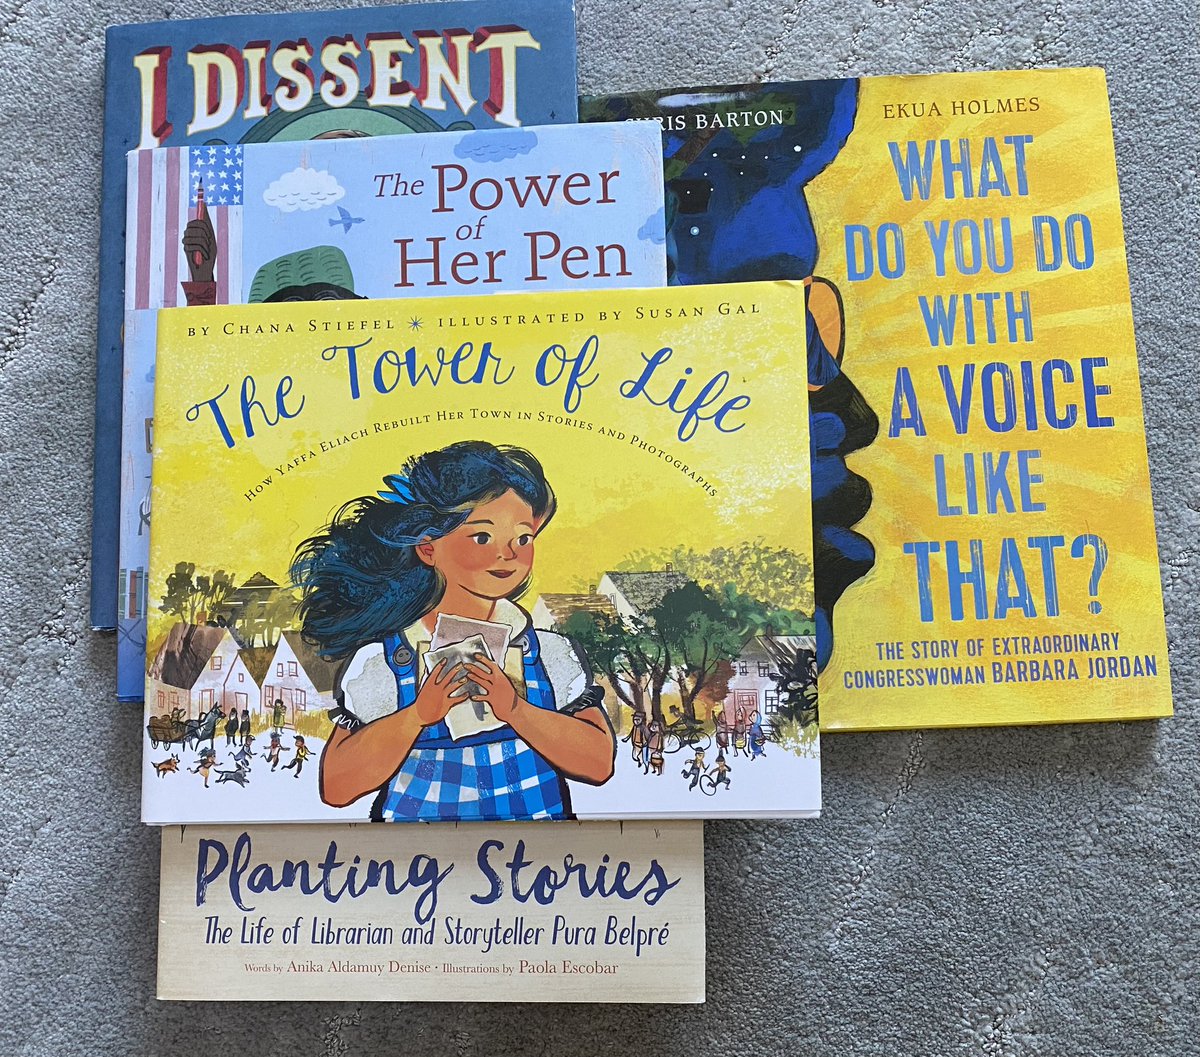 In honor of #internationalwomensday here are five terrific mentor texts about fabulous women #kidlit #writingcommunity #biography #kidsnonfiction

@lclineransome @chanastiefel @Bartography @debbielevybooks  

#WomensHistoryMonth2023